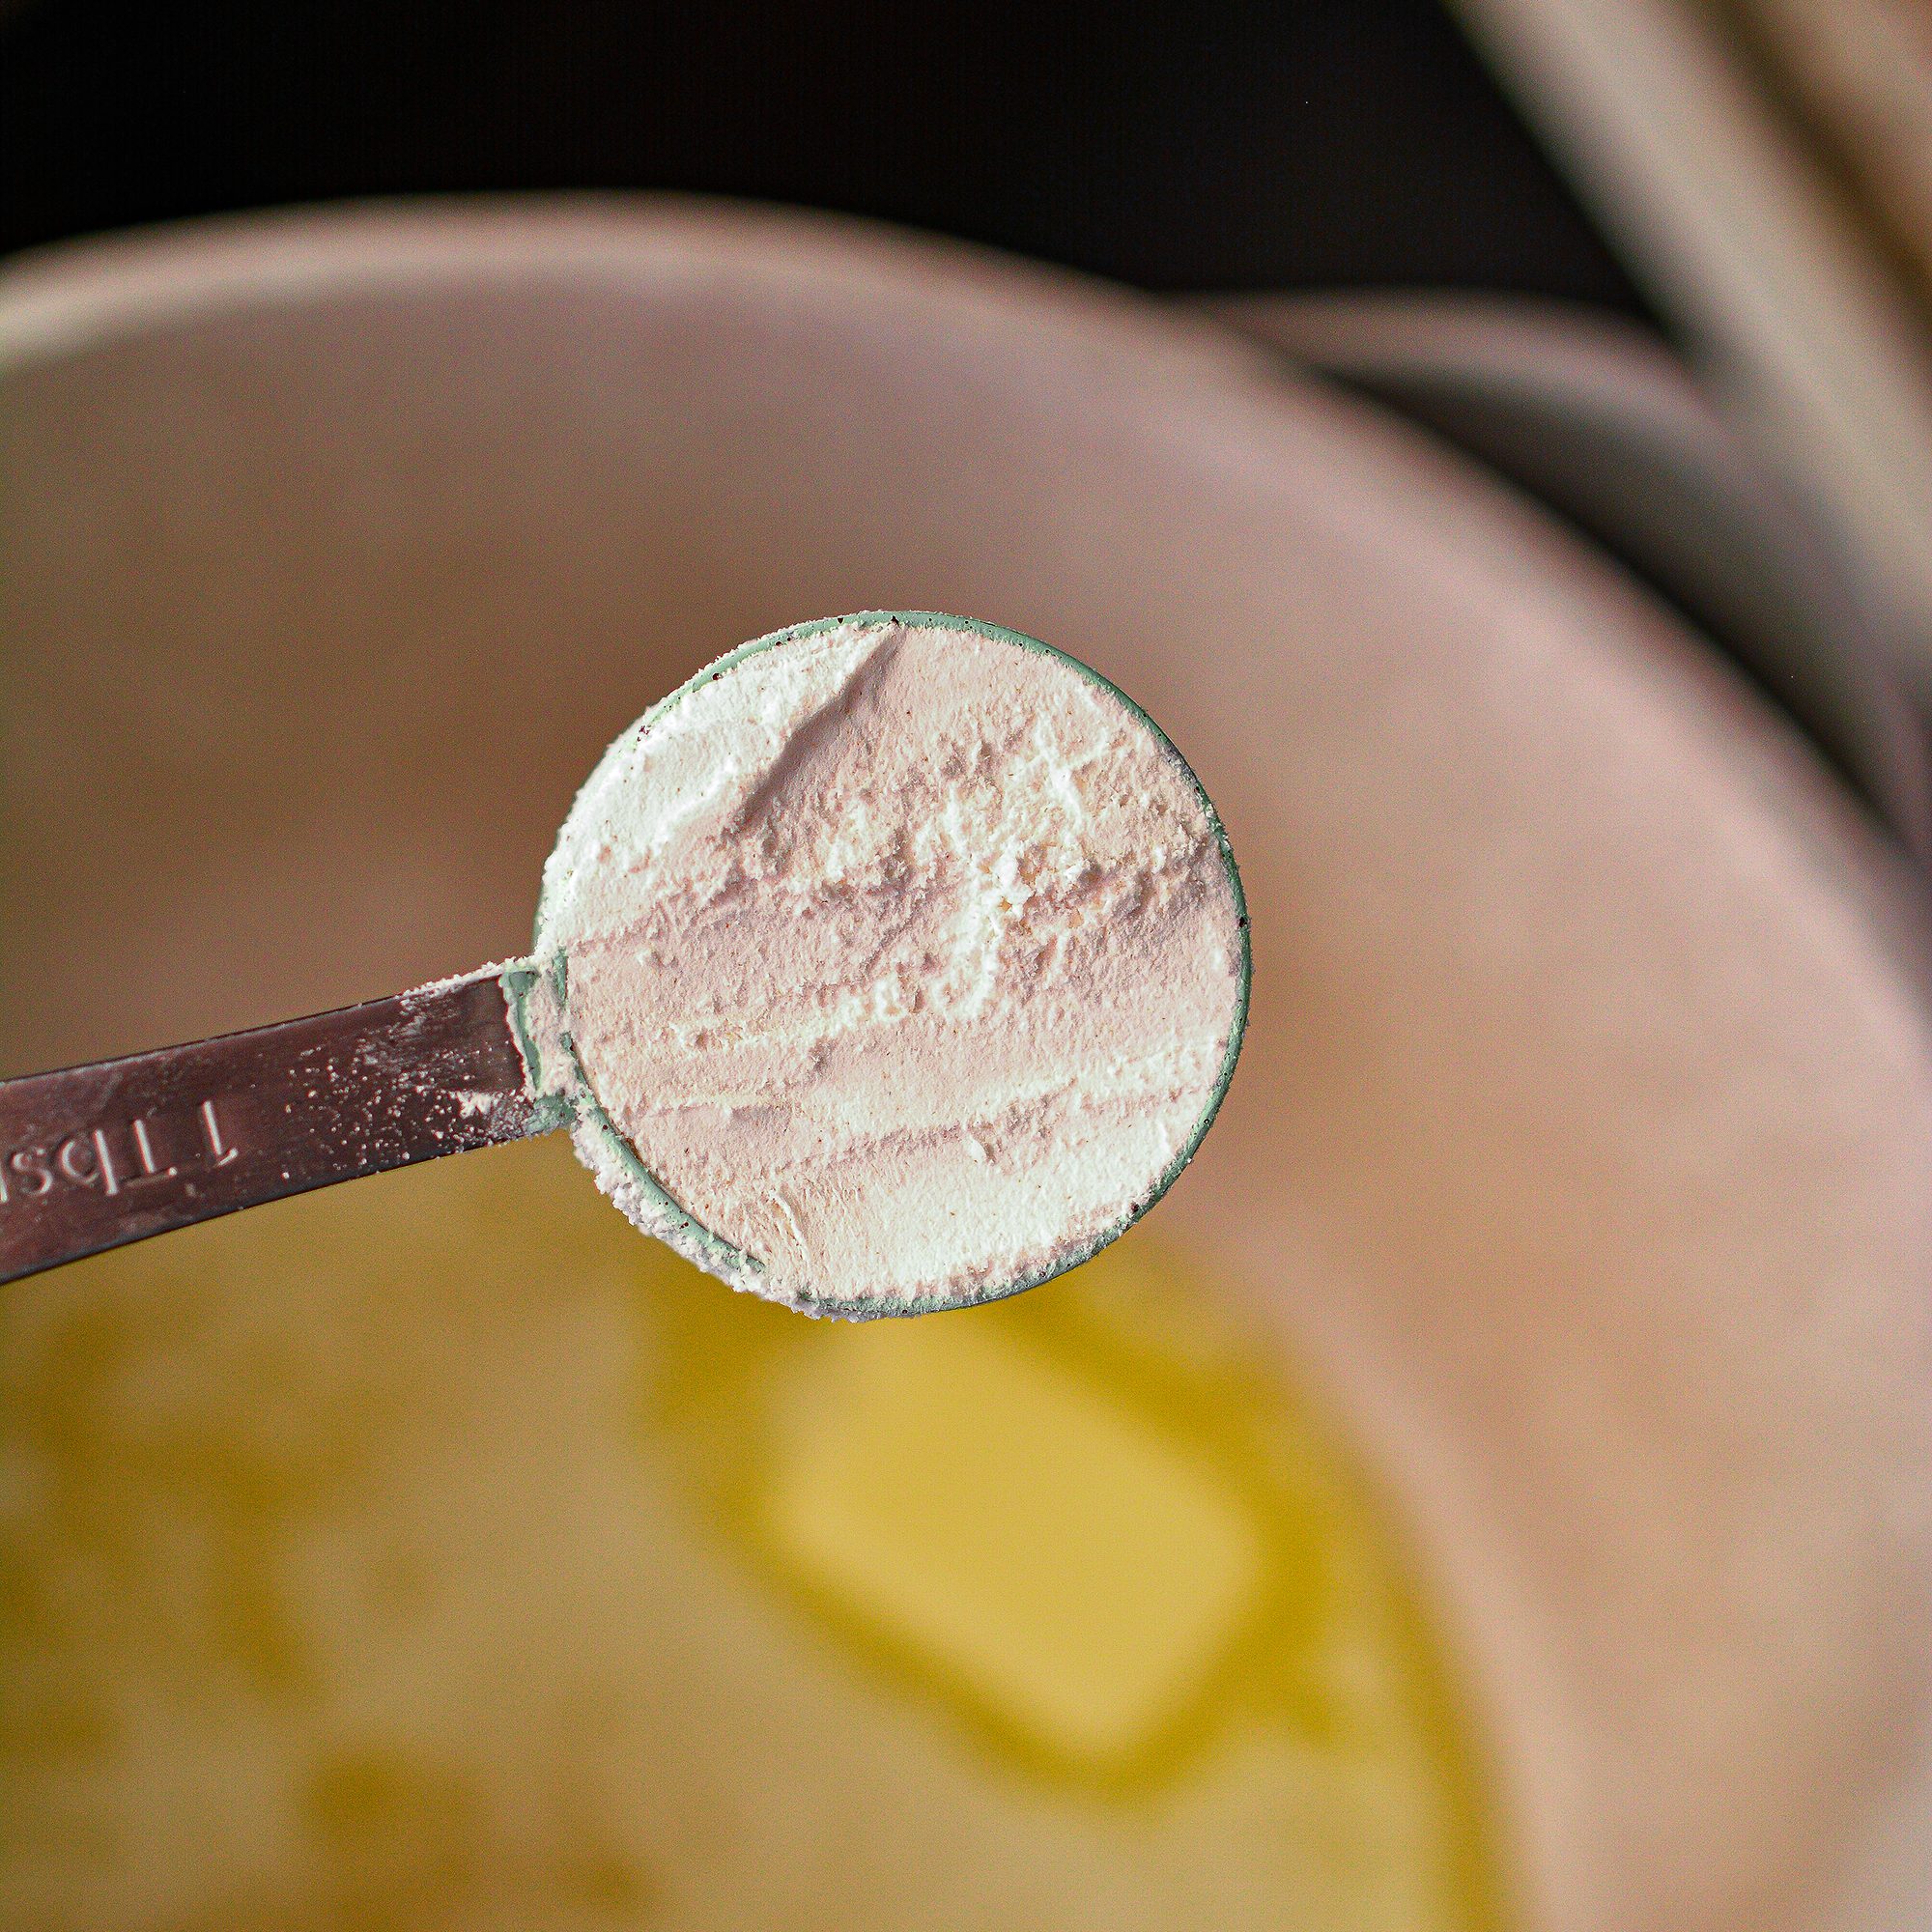 Whisk the flour into the butter in the saucepan, and saute for 1 minute.